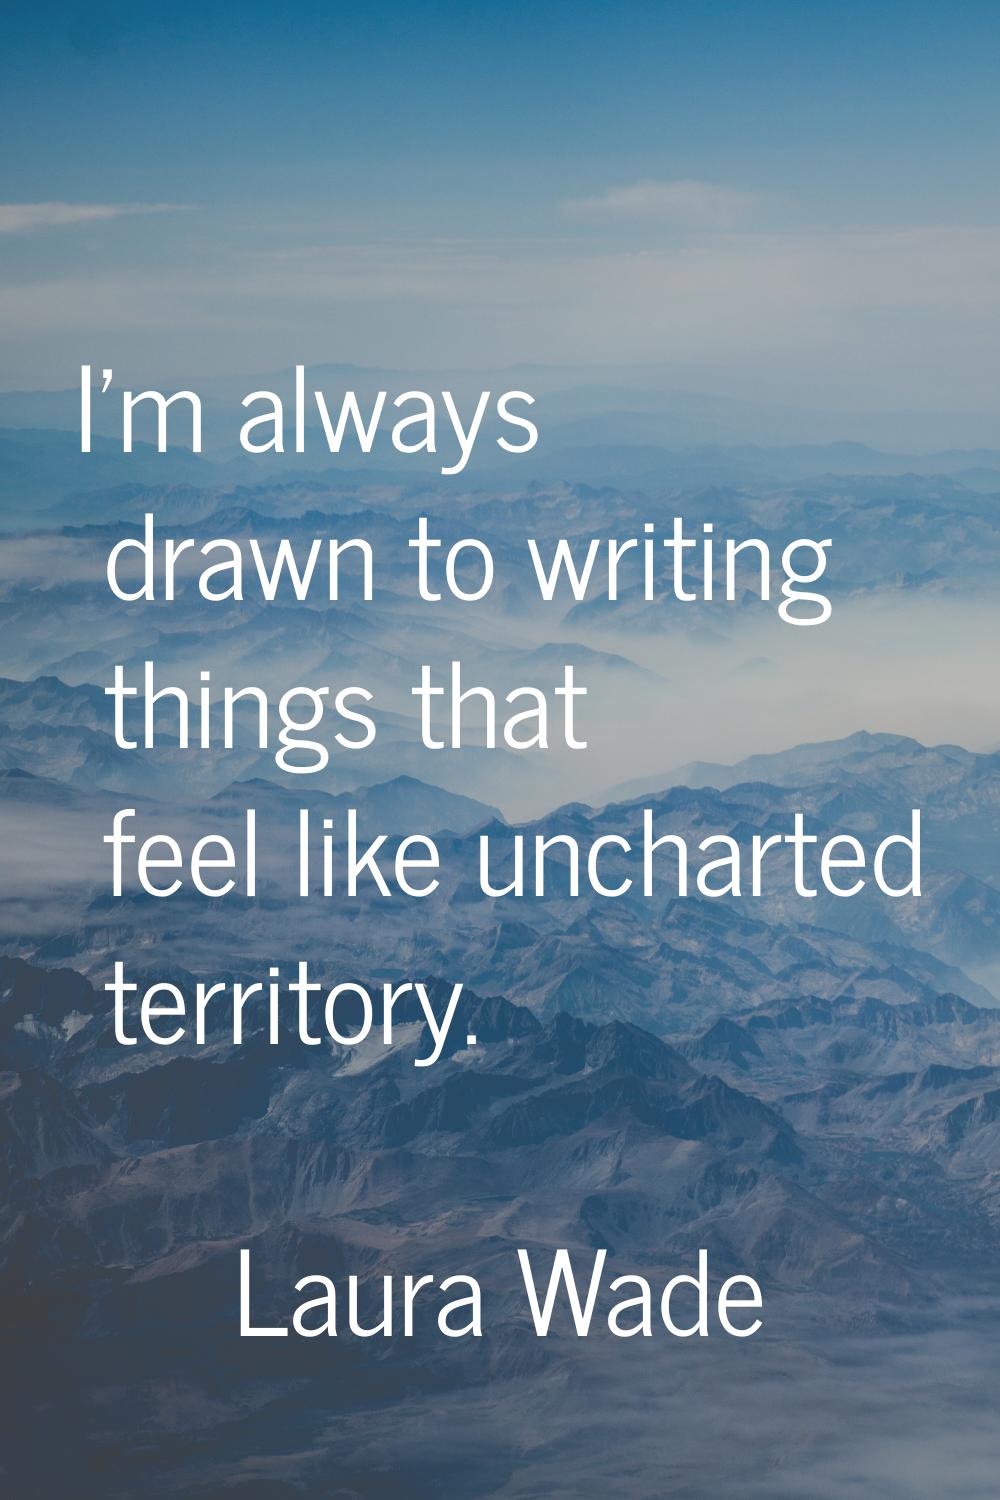 I'm always drawn to writing things that feel like uncharted territory.